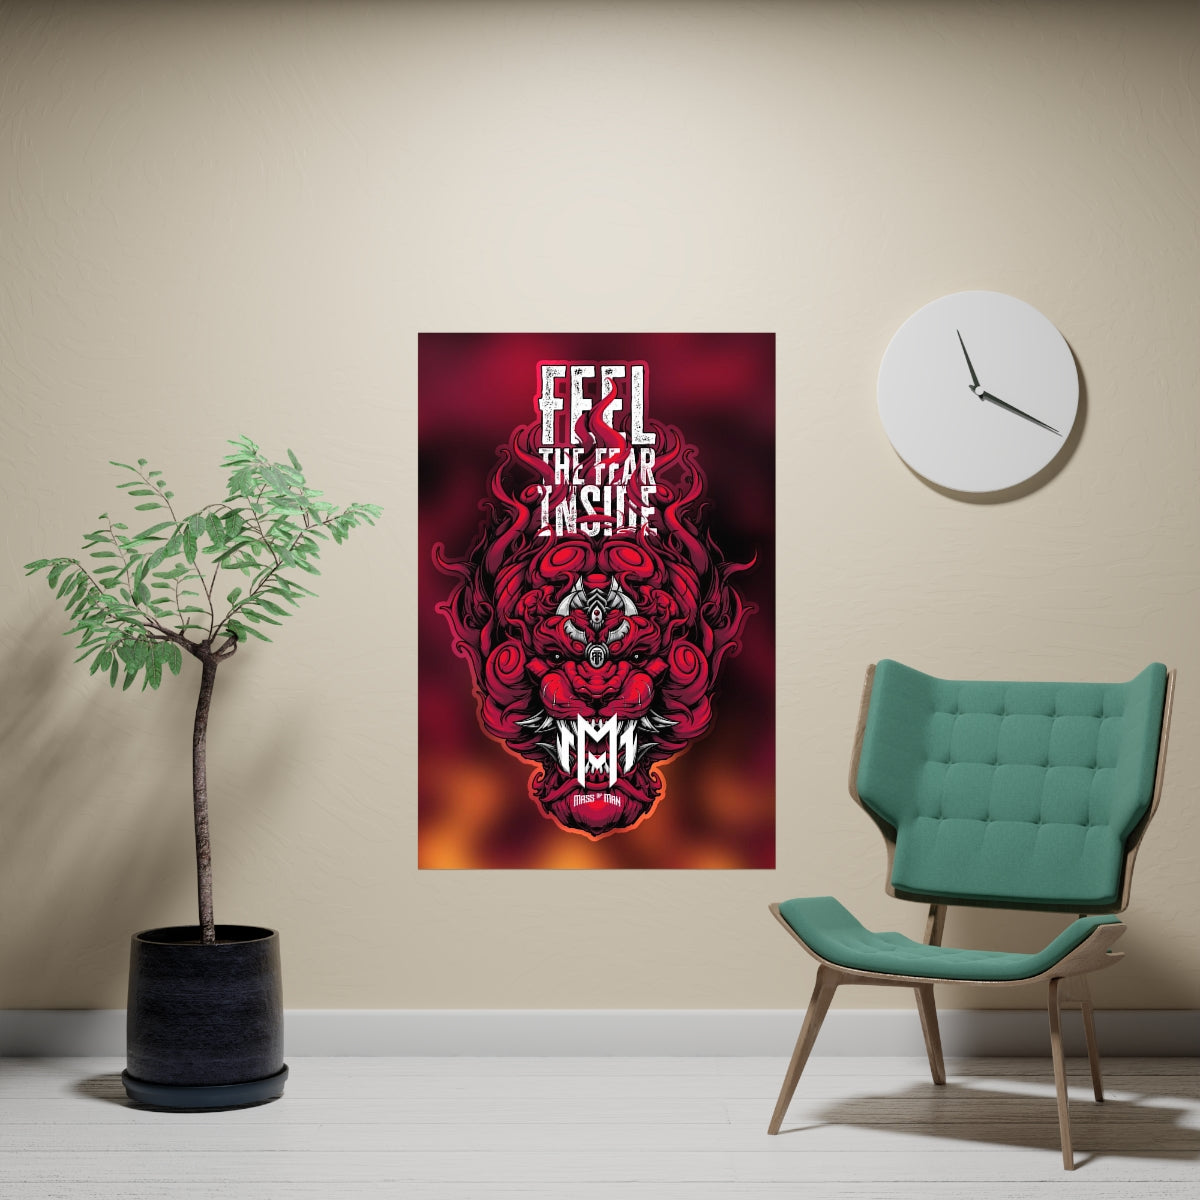 Feel The Fear Inside - Mass of Man Posters